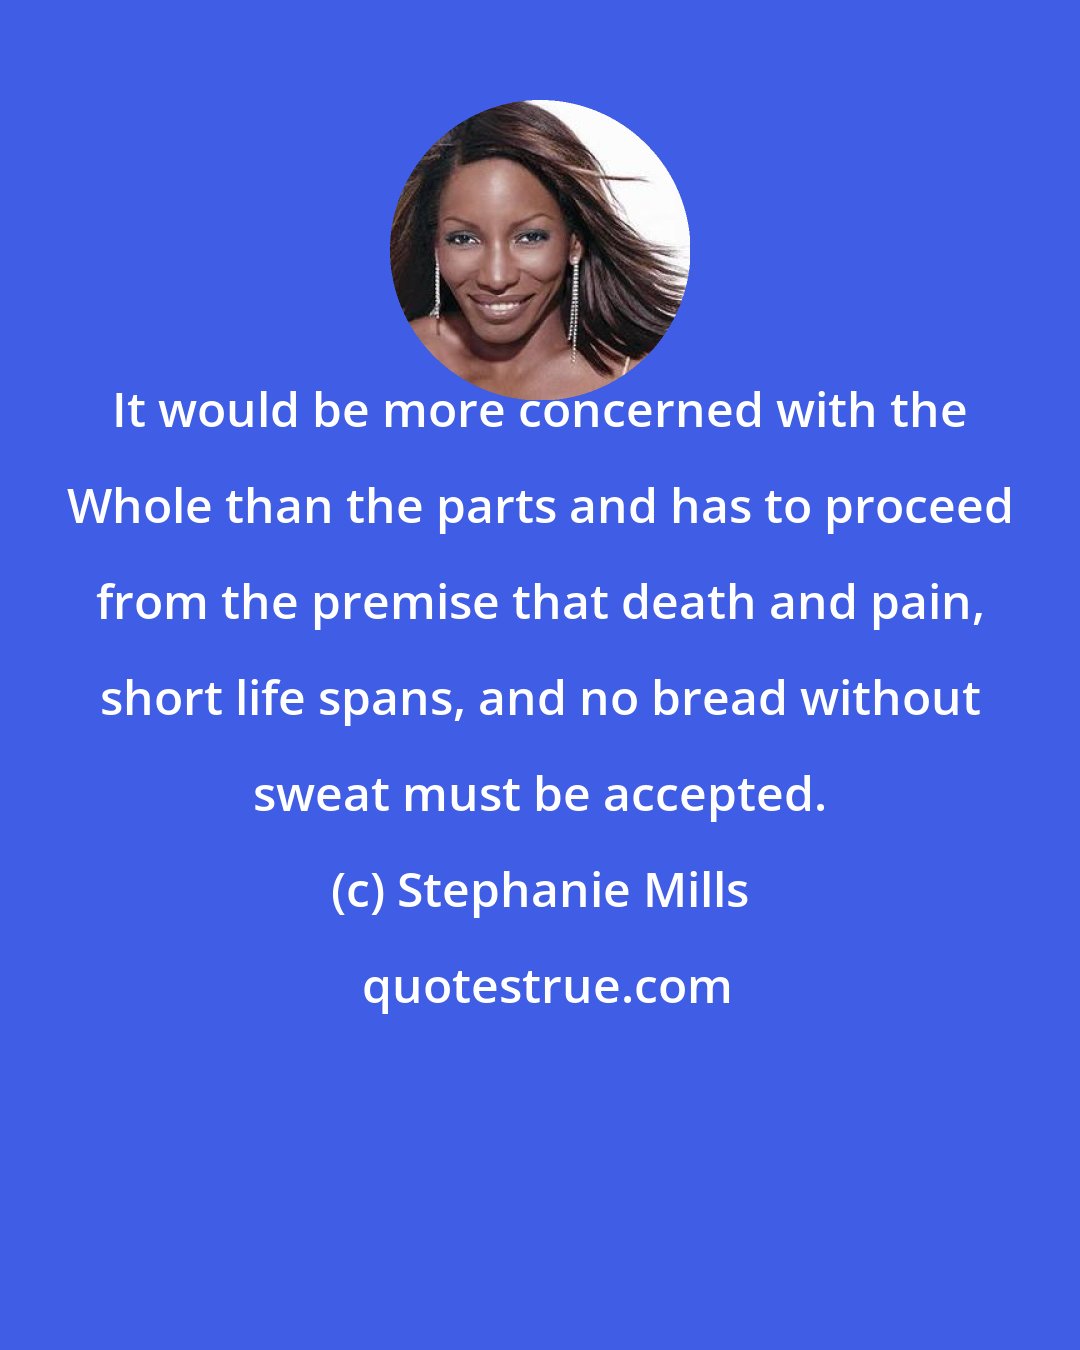 Stephanie Mills: It would be more concerned with the Whole than the parts and has to proceed from the premise that death and pain, short life spans, and no bread without sweat must be accepted.